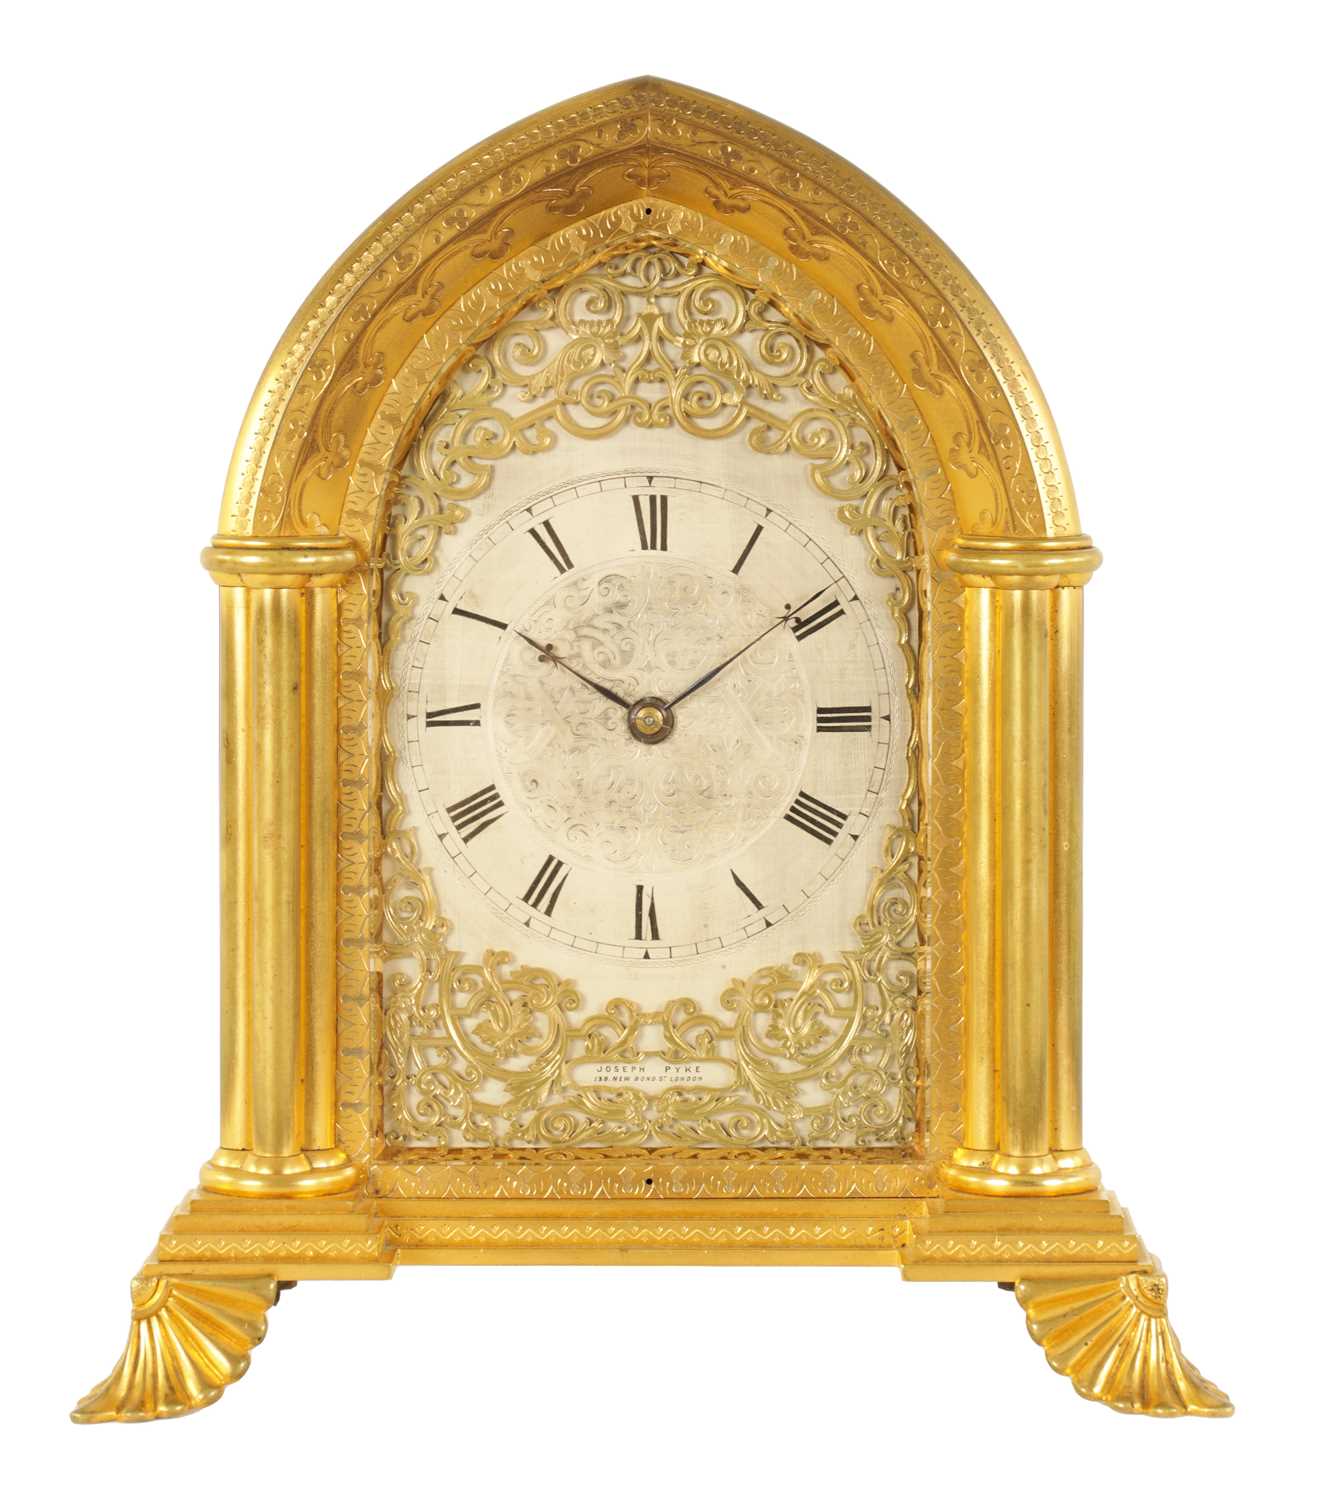 Lot 714 - ATTRIBUTED TO THOMAS COLE.  A FINE GILT BRASS GOTHIC REVIVAL TWIN FUSEE GILT BRASS STRUT CLOCK OF LARGE PROPORTIONS CIRCA 1860